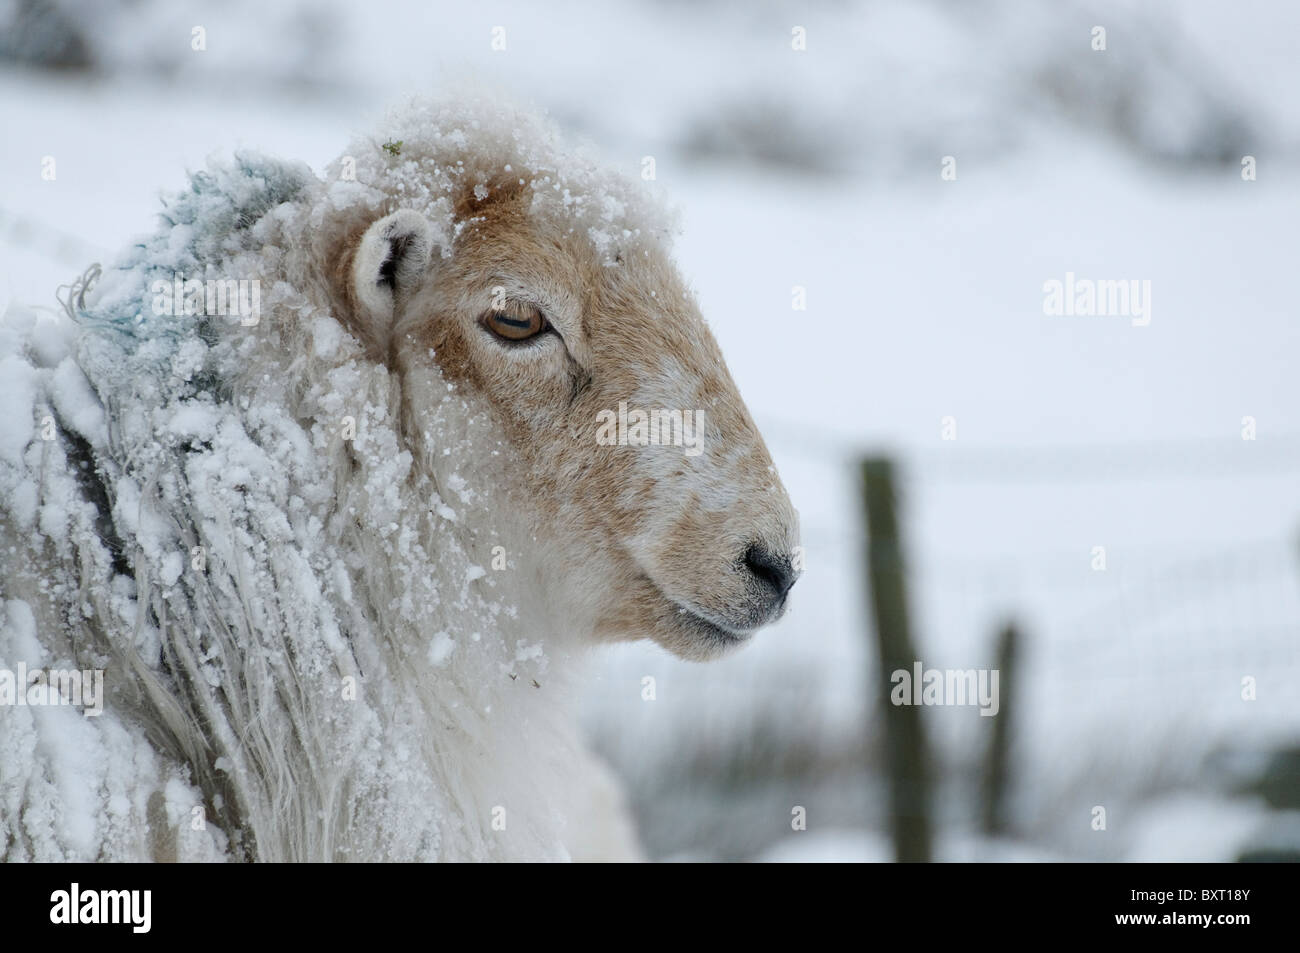 A snow covered sheep Stock Photo